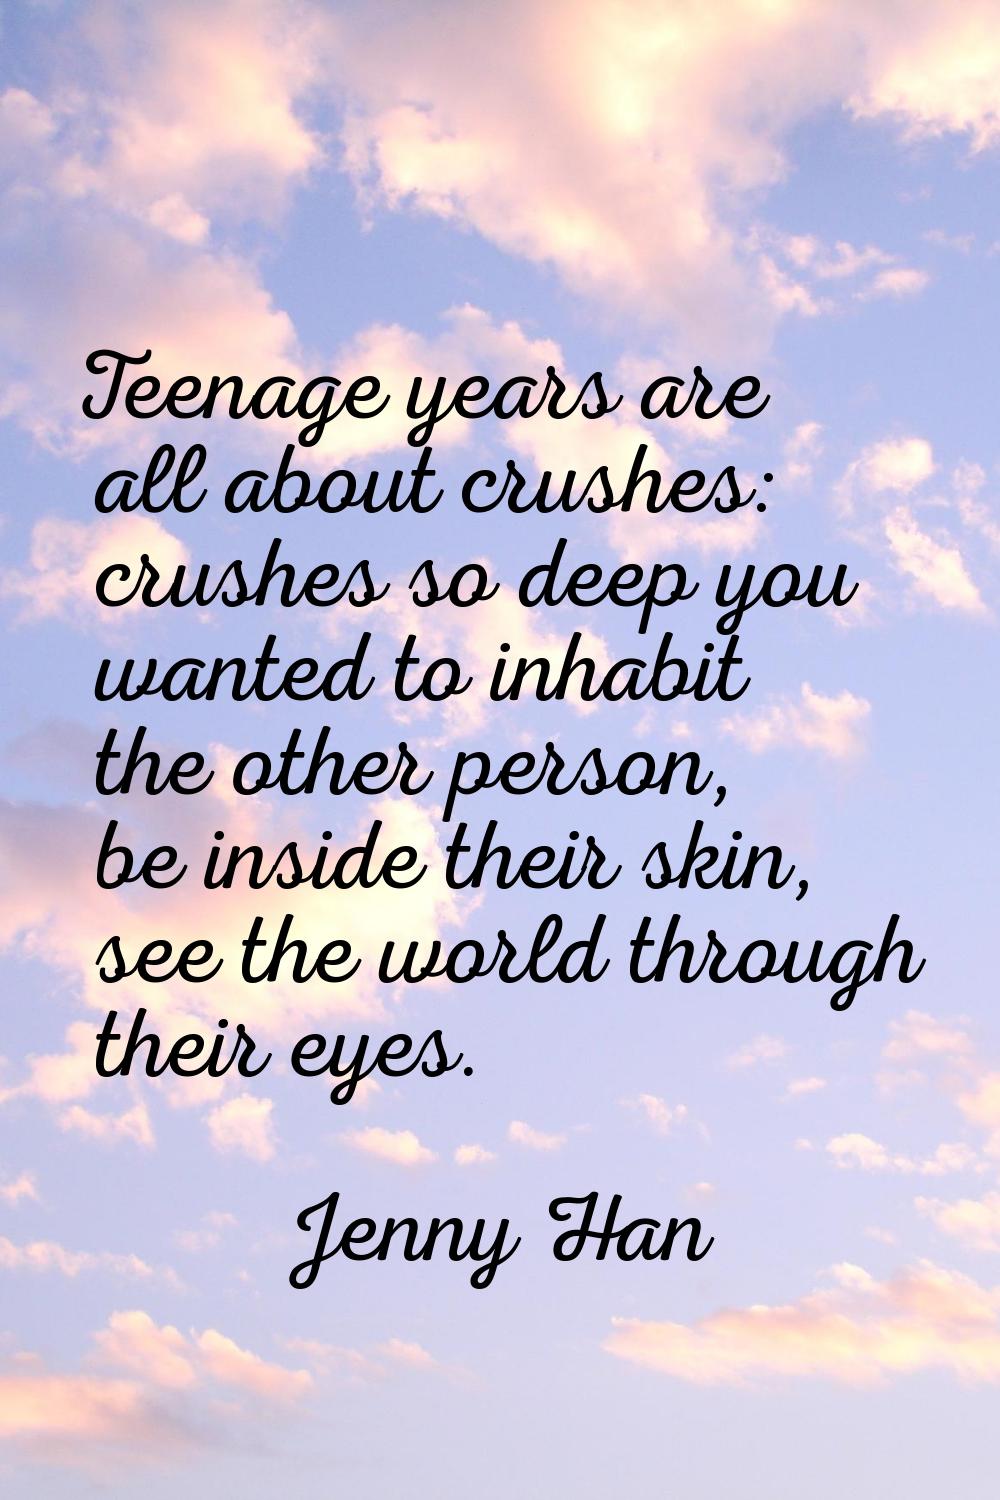 Teenage years are all about crushes: crushes so deep you wanted to inhabit the other person, be ins